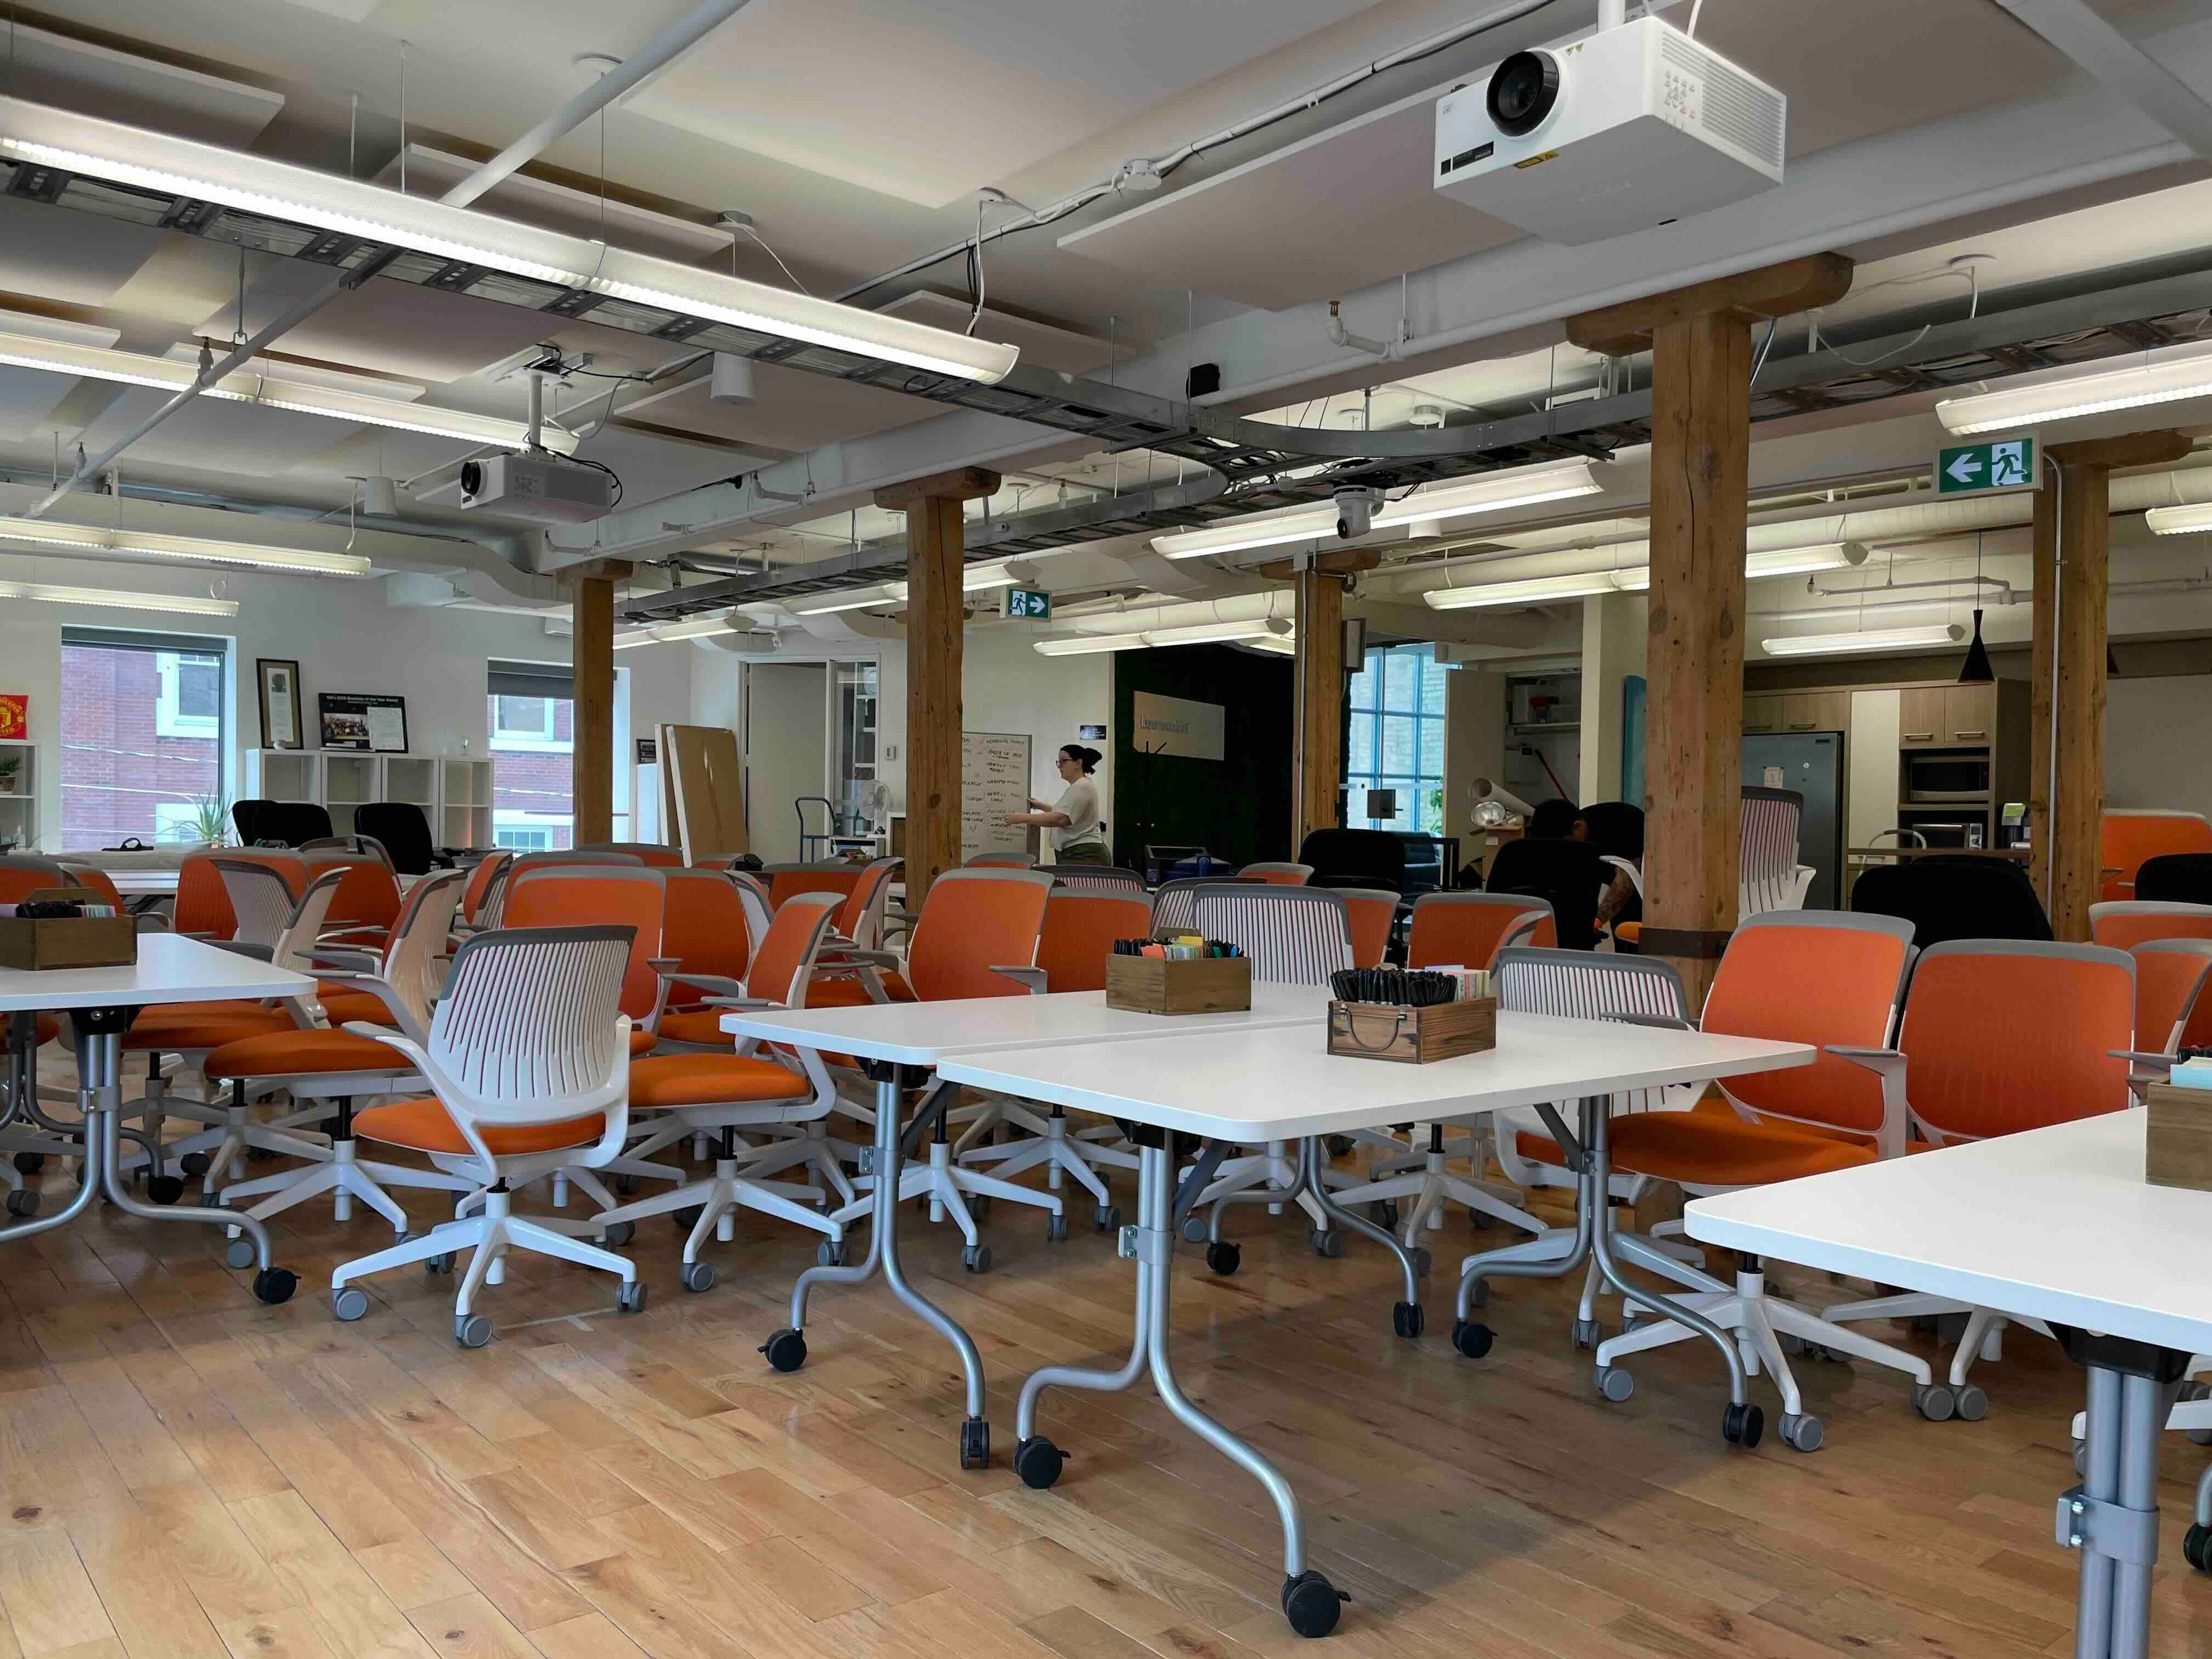 Wide open place office space filled with orange chairs shows just how quickly a change initiative can happen when everyone is on board.